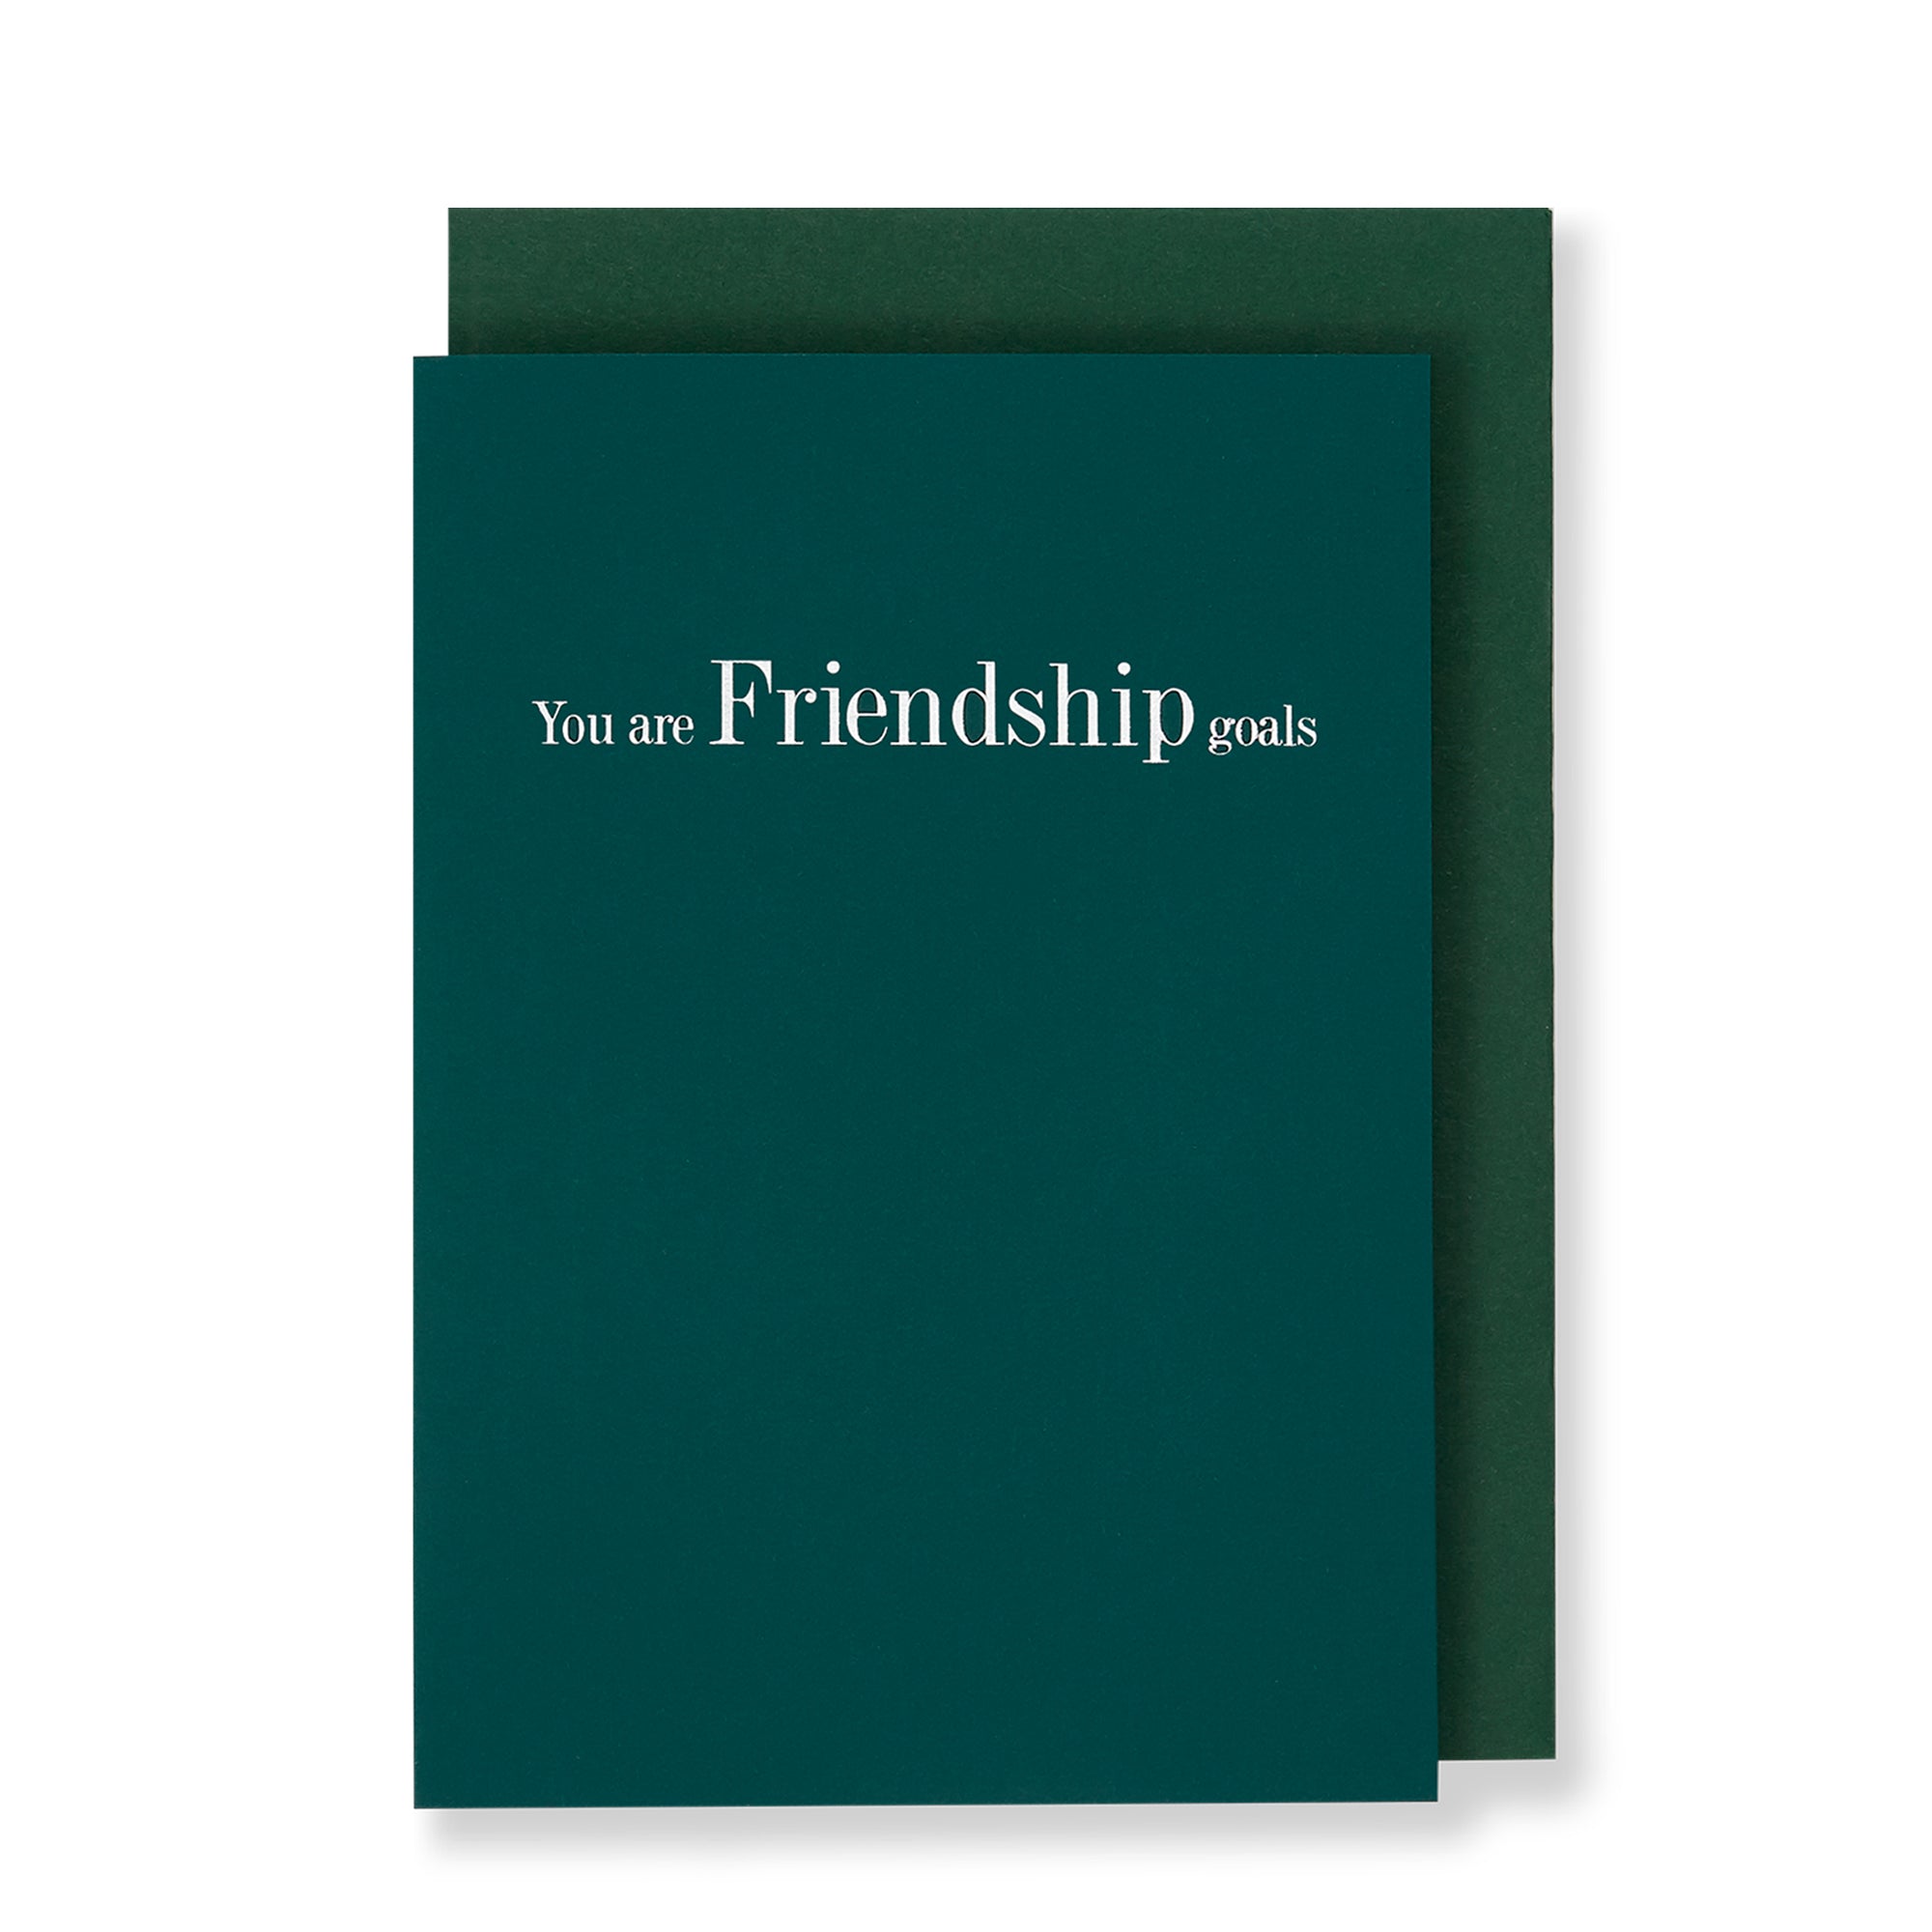 You Are Friendship Goals Greeting Card in Forest Green, Front